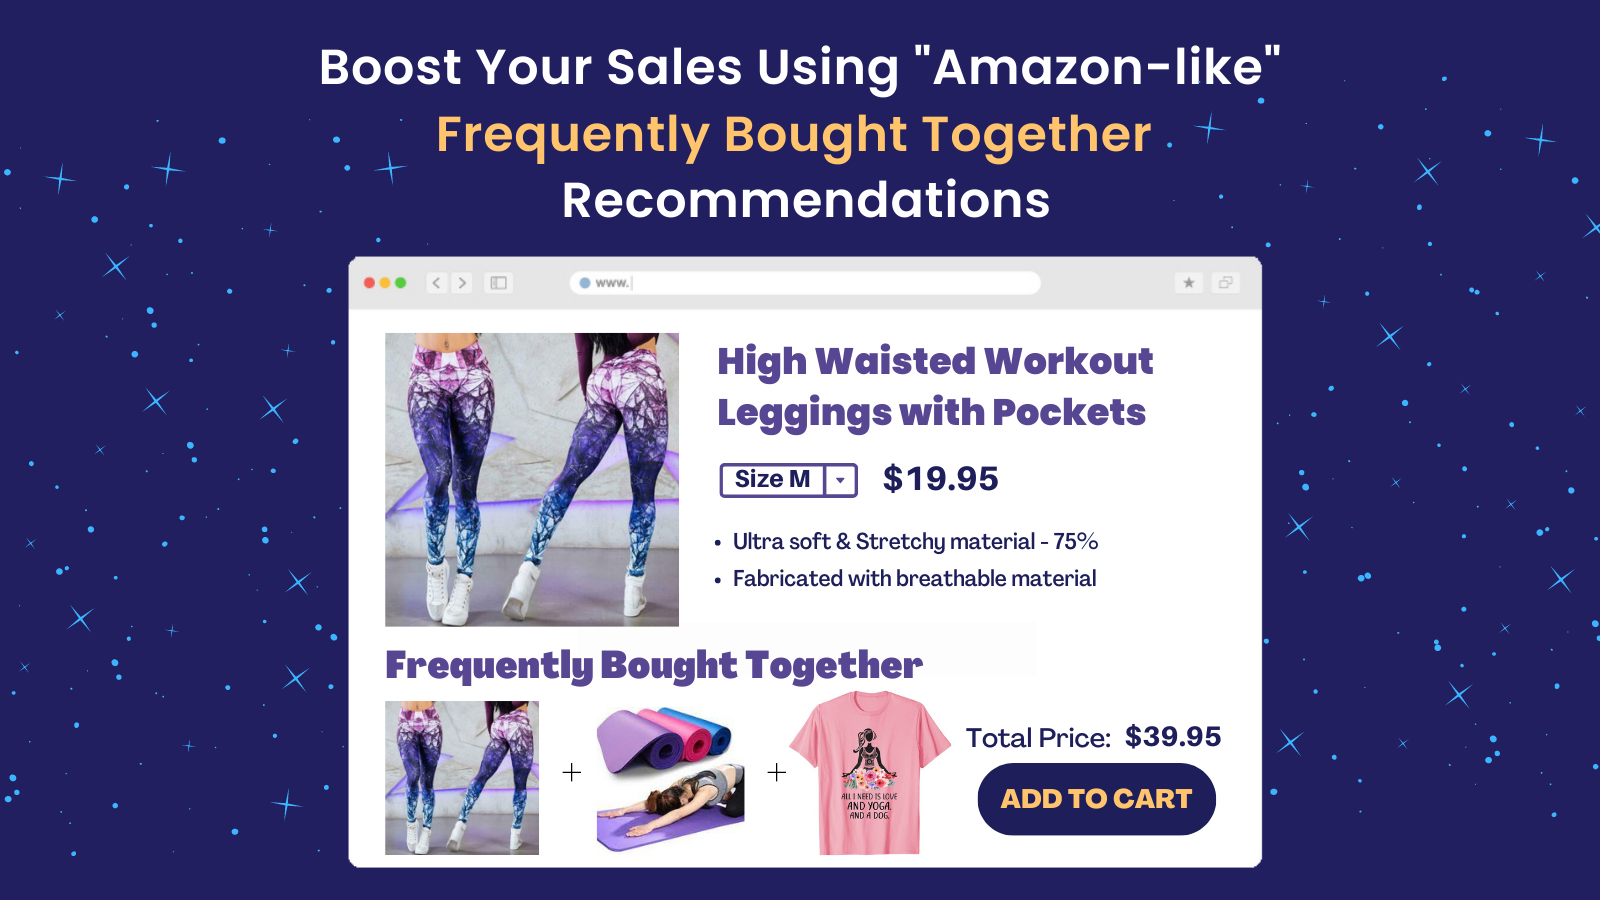 Boost your sales using "Amazon-like" Frequently Bought Together product reccomandations.